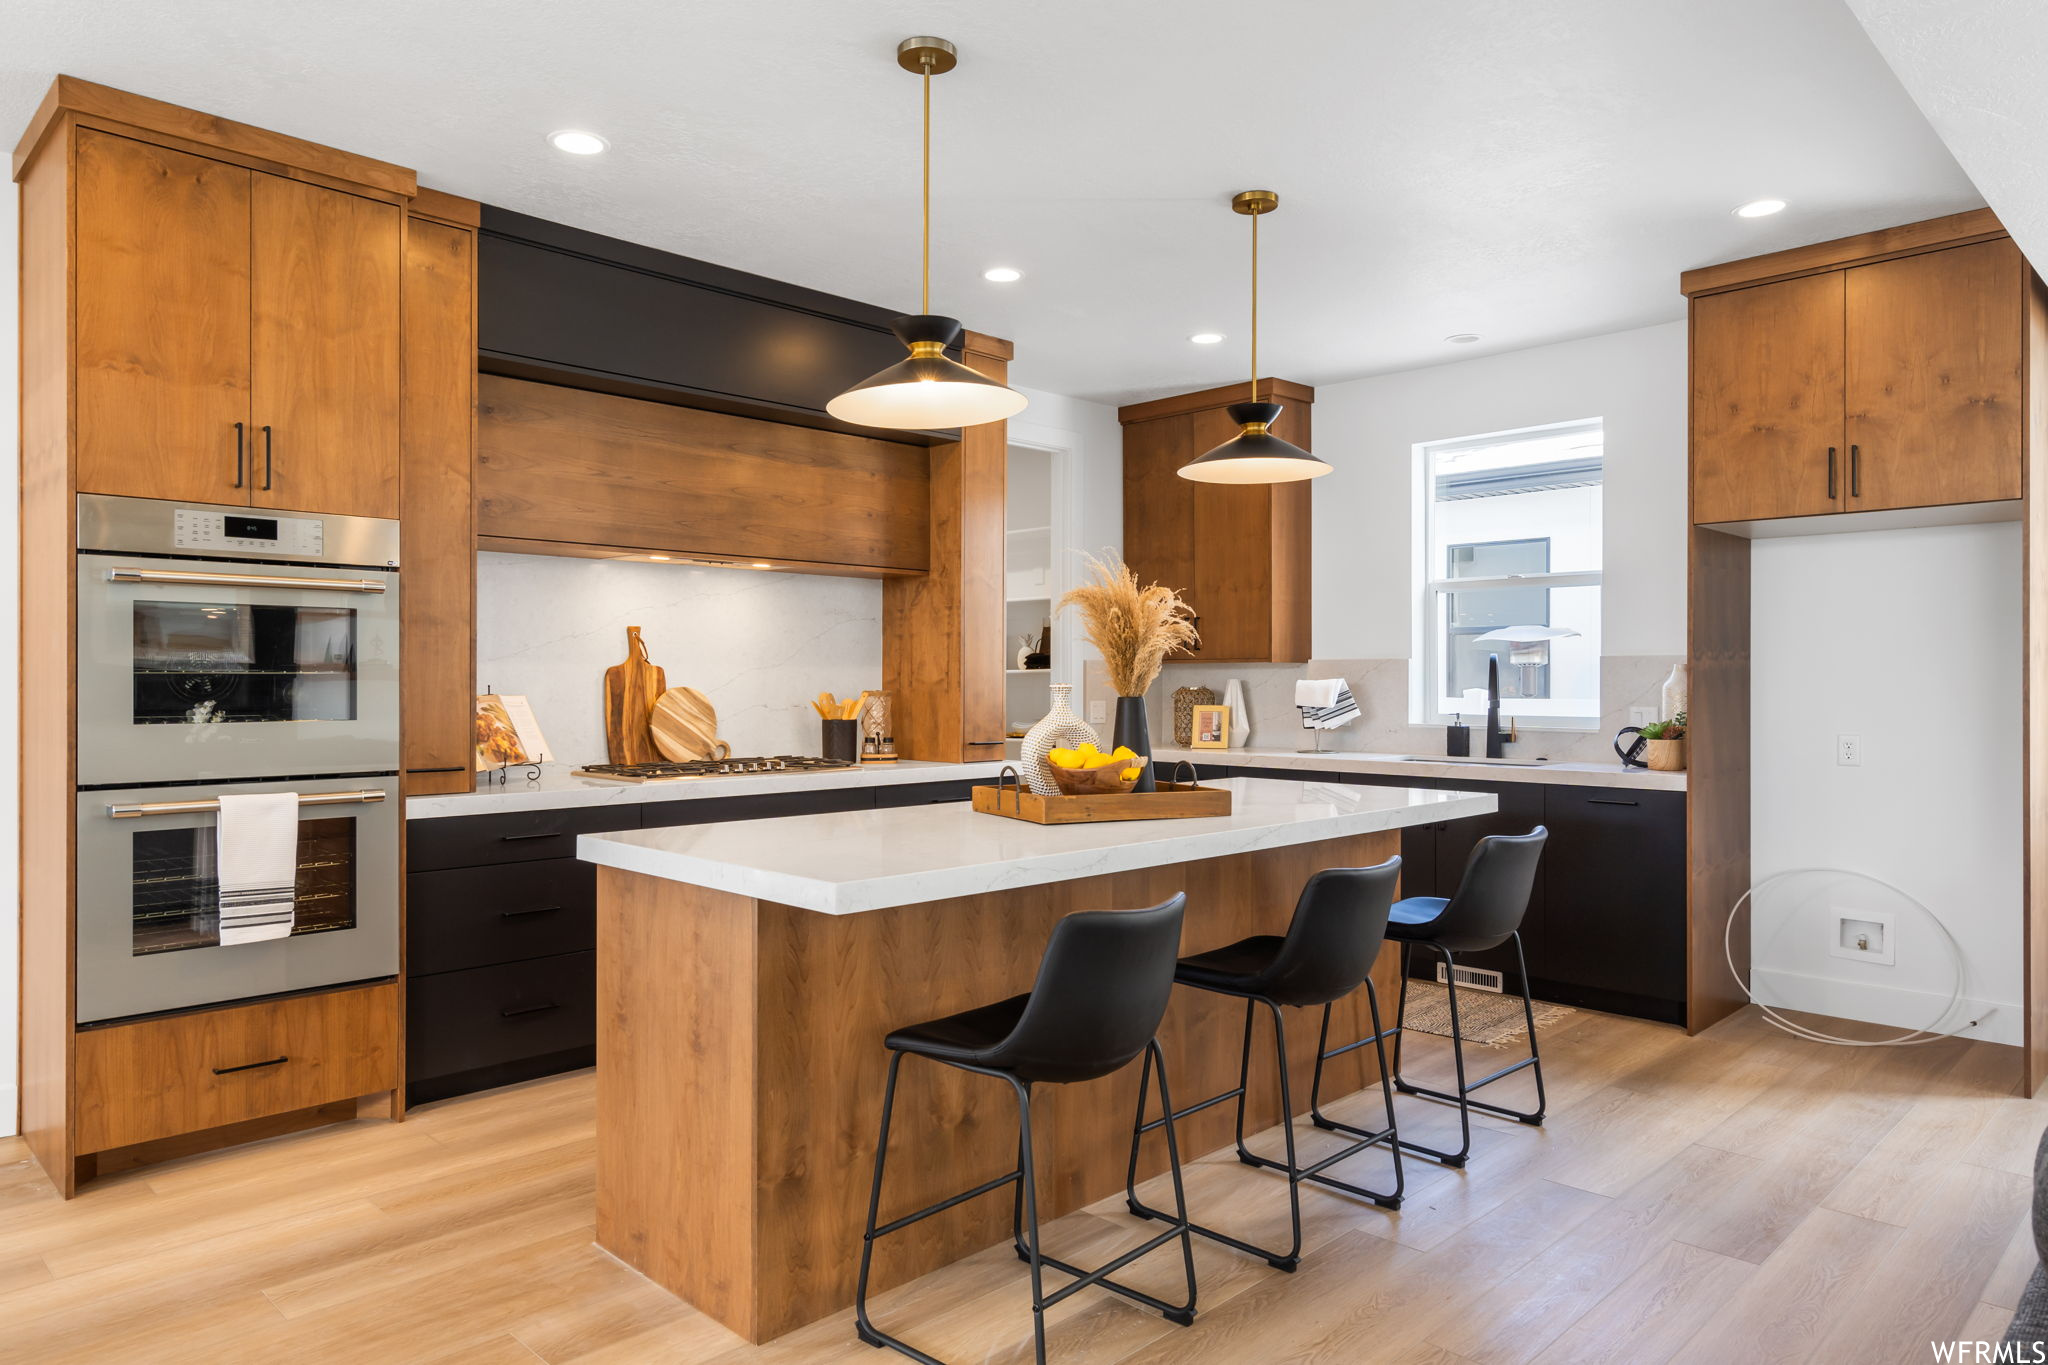 Kitchen with a breakfast bar area, a center island, natural light, gas stovetop, double oven, light hardwood floors, brown cabinetry, light countertops, and pendant lighting